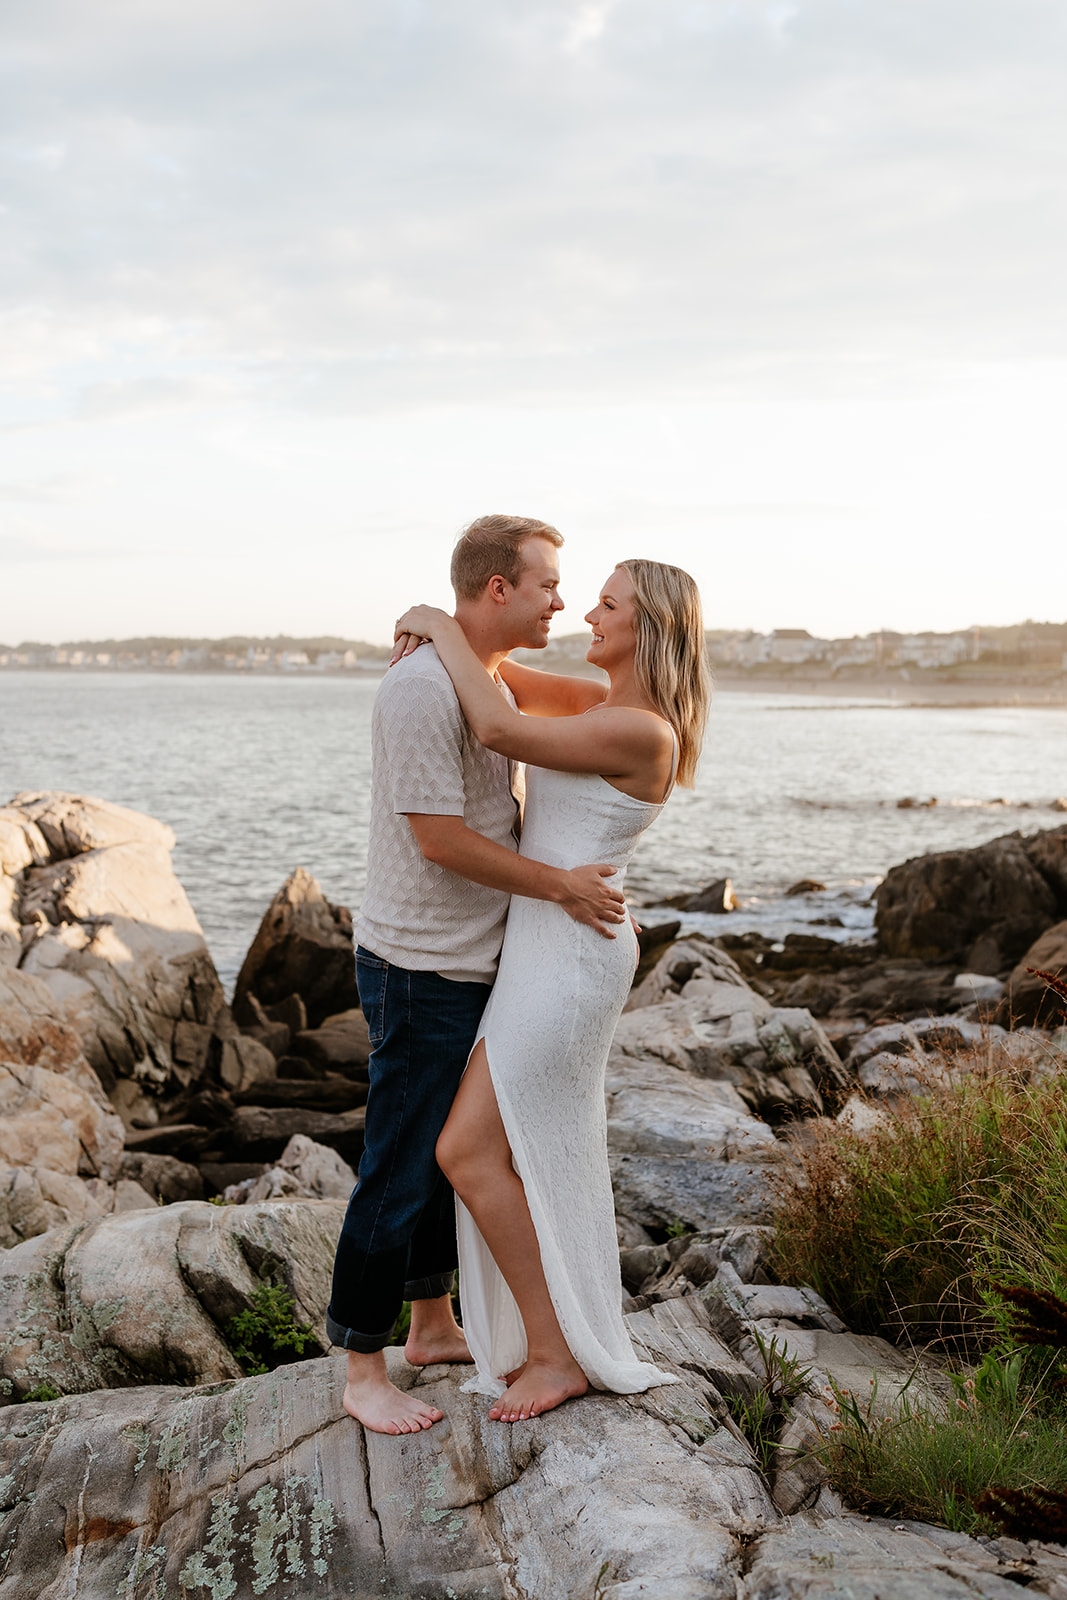 A couple sitting closely on rocky coastal terrain, smiling and embracing each other, with a serene water backdrop during sunset.